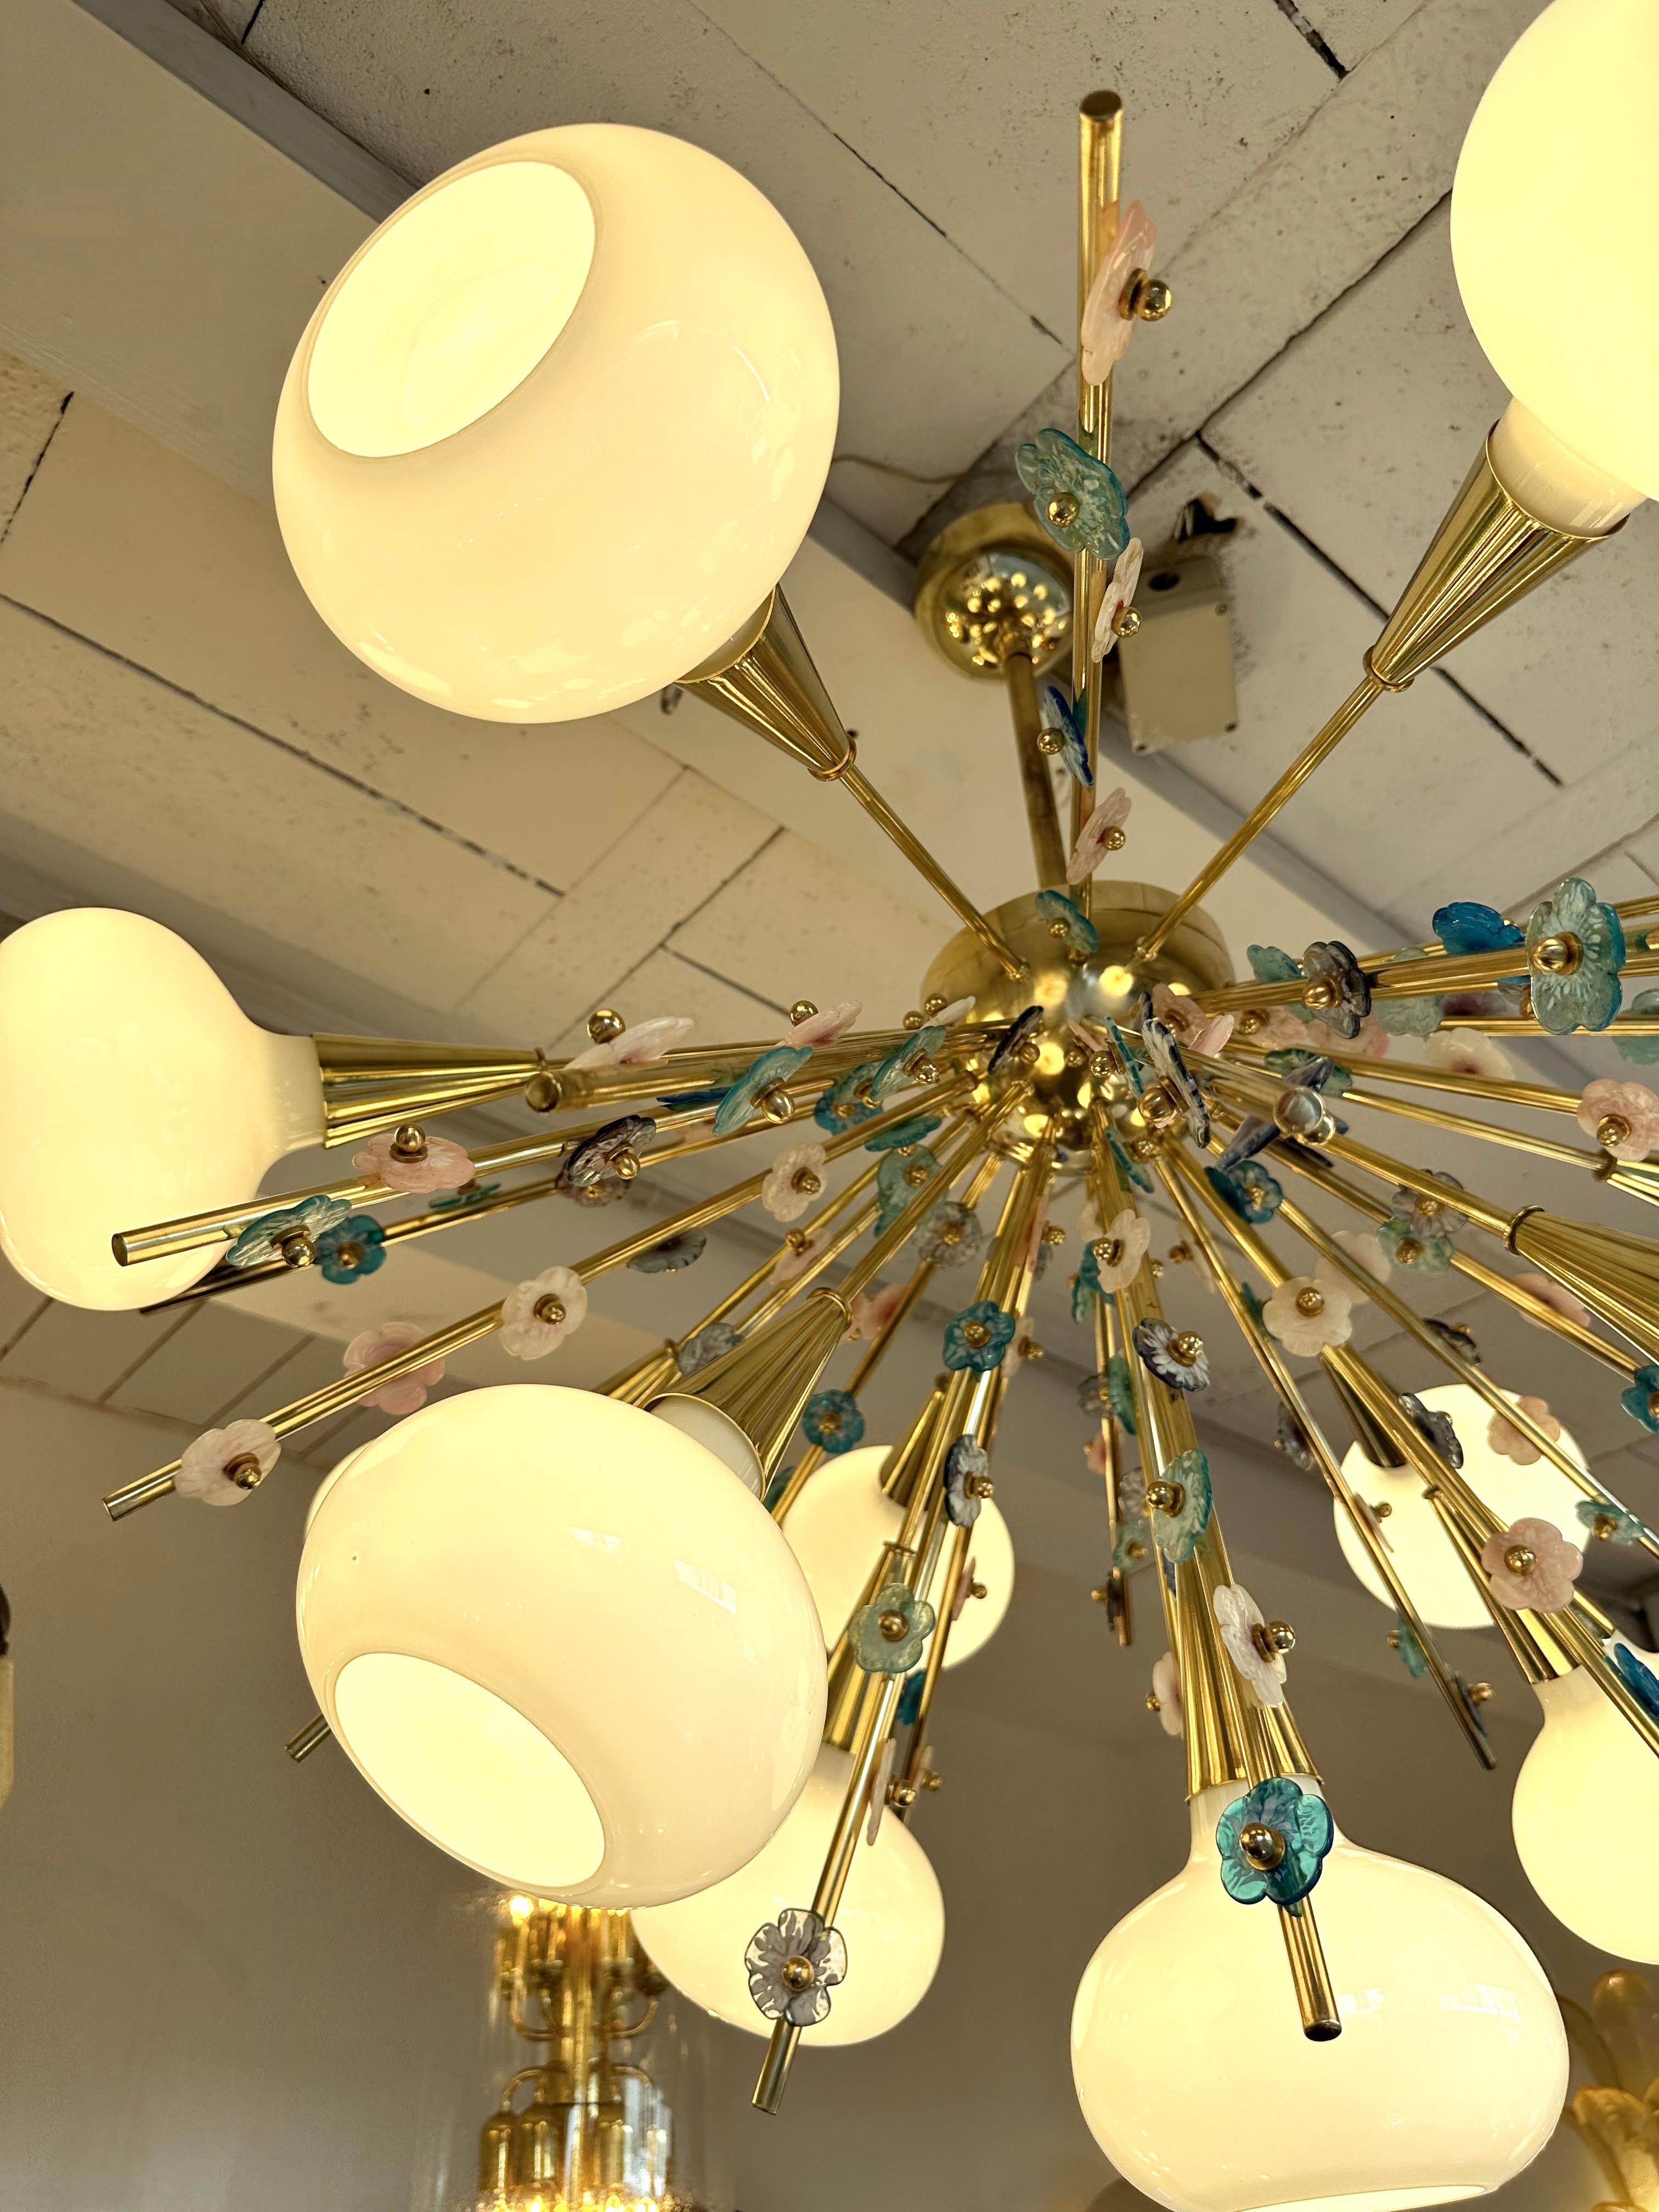 Brass sputnik chandelier ceiling pendant light lamp with white Murano glass cup and a lot of Murano glass flowers blue, pink, white, acquamarina turquoise. Contemporary work from a small italian design artisanal workshop. In the mood of Mid-Century